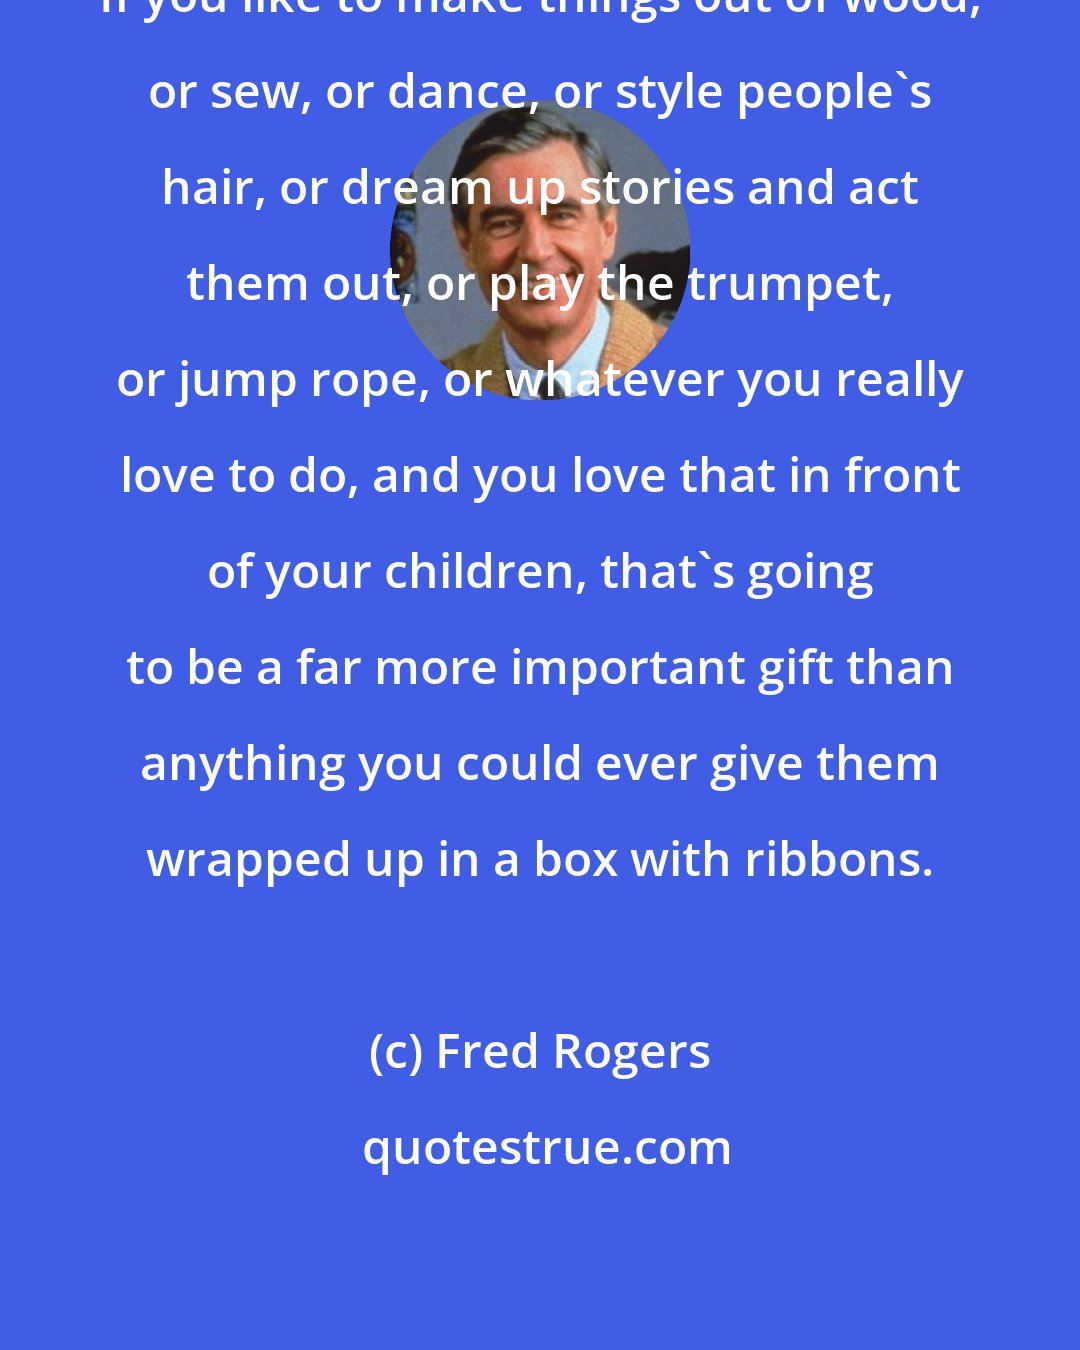 Fred Rogers: If you like to make things out of wood, or sew, or dance, or style people's hair, or dream up stories and act them out, or play the trumpet, or jump rope, or whatever you really love to do, and you love that in front of your children, that's going to be a far more important gift than anything you could ever give them wrapped up in a box with ribbons.